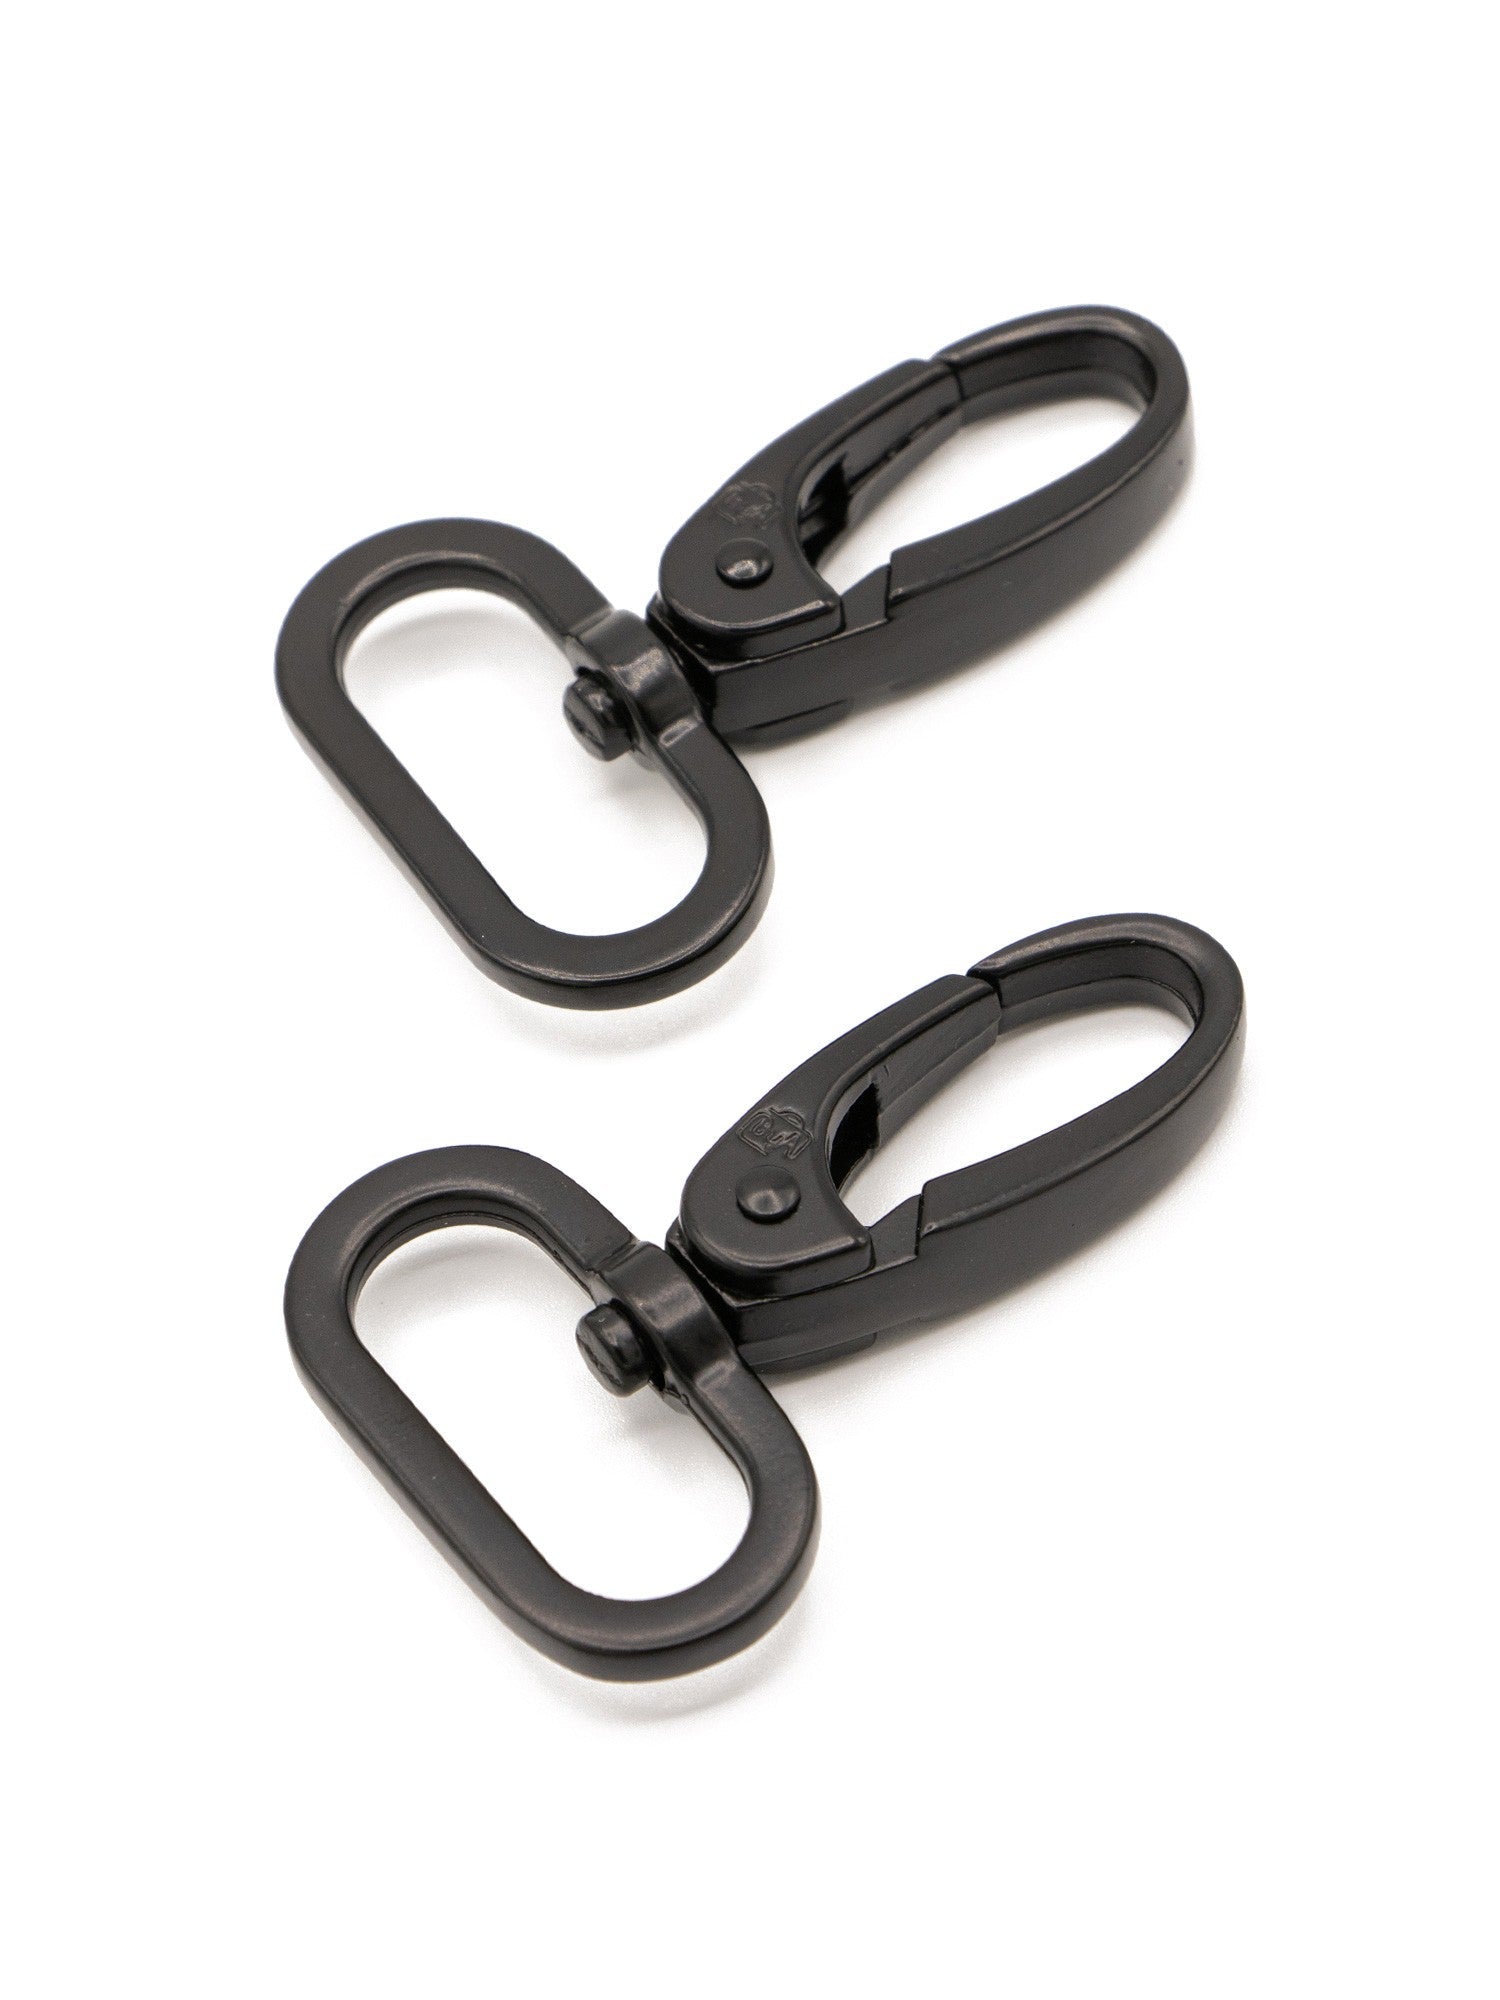 Swivel Hook 1in Black Metal Set of Two-By Annie.com-My Favorite Quilt Store